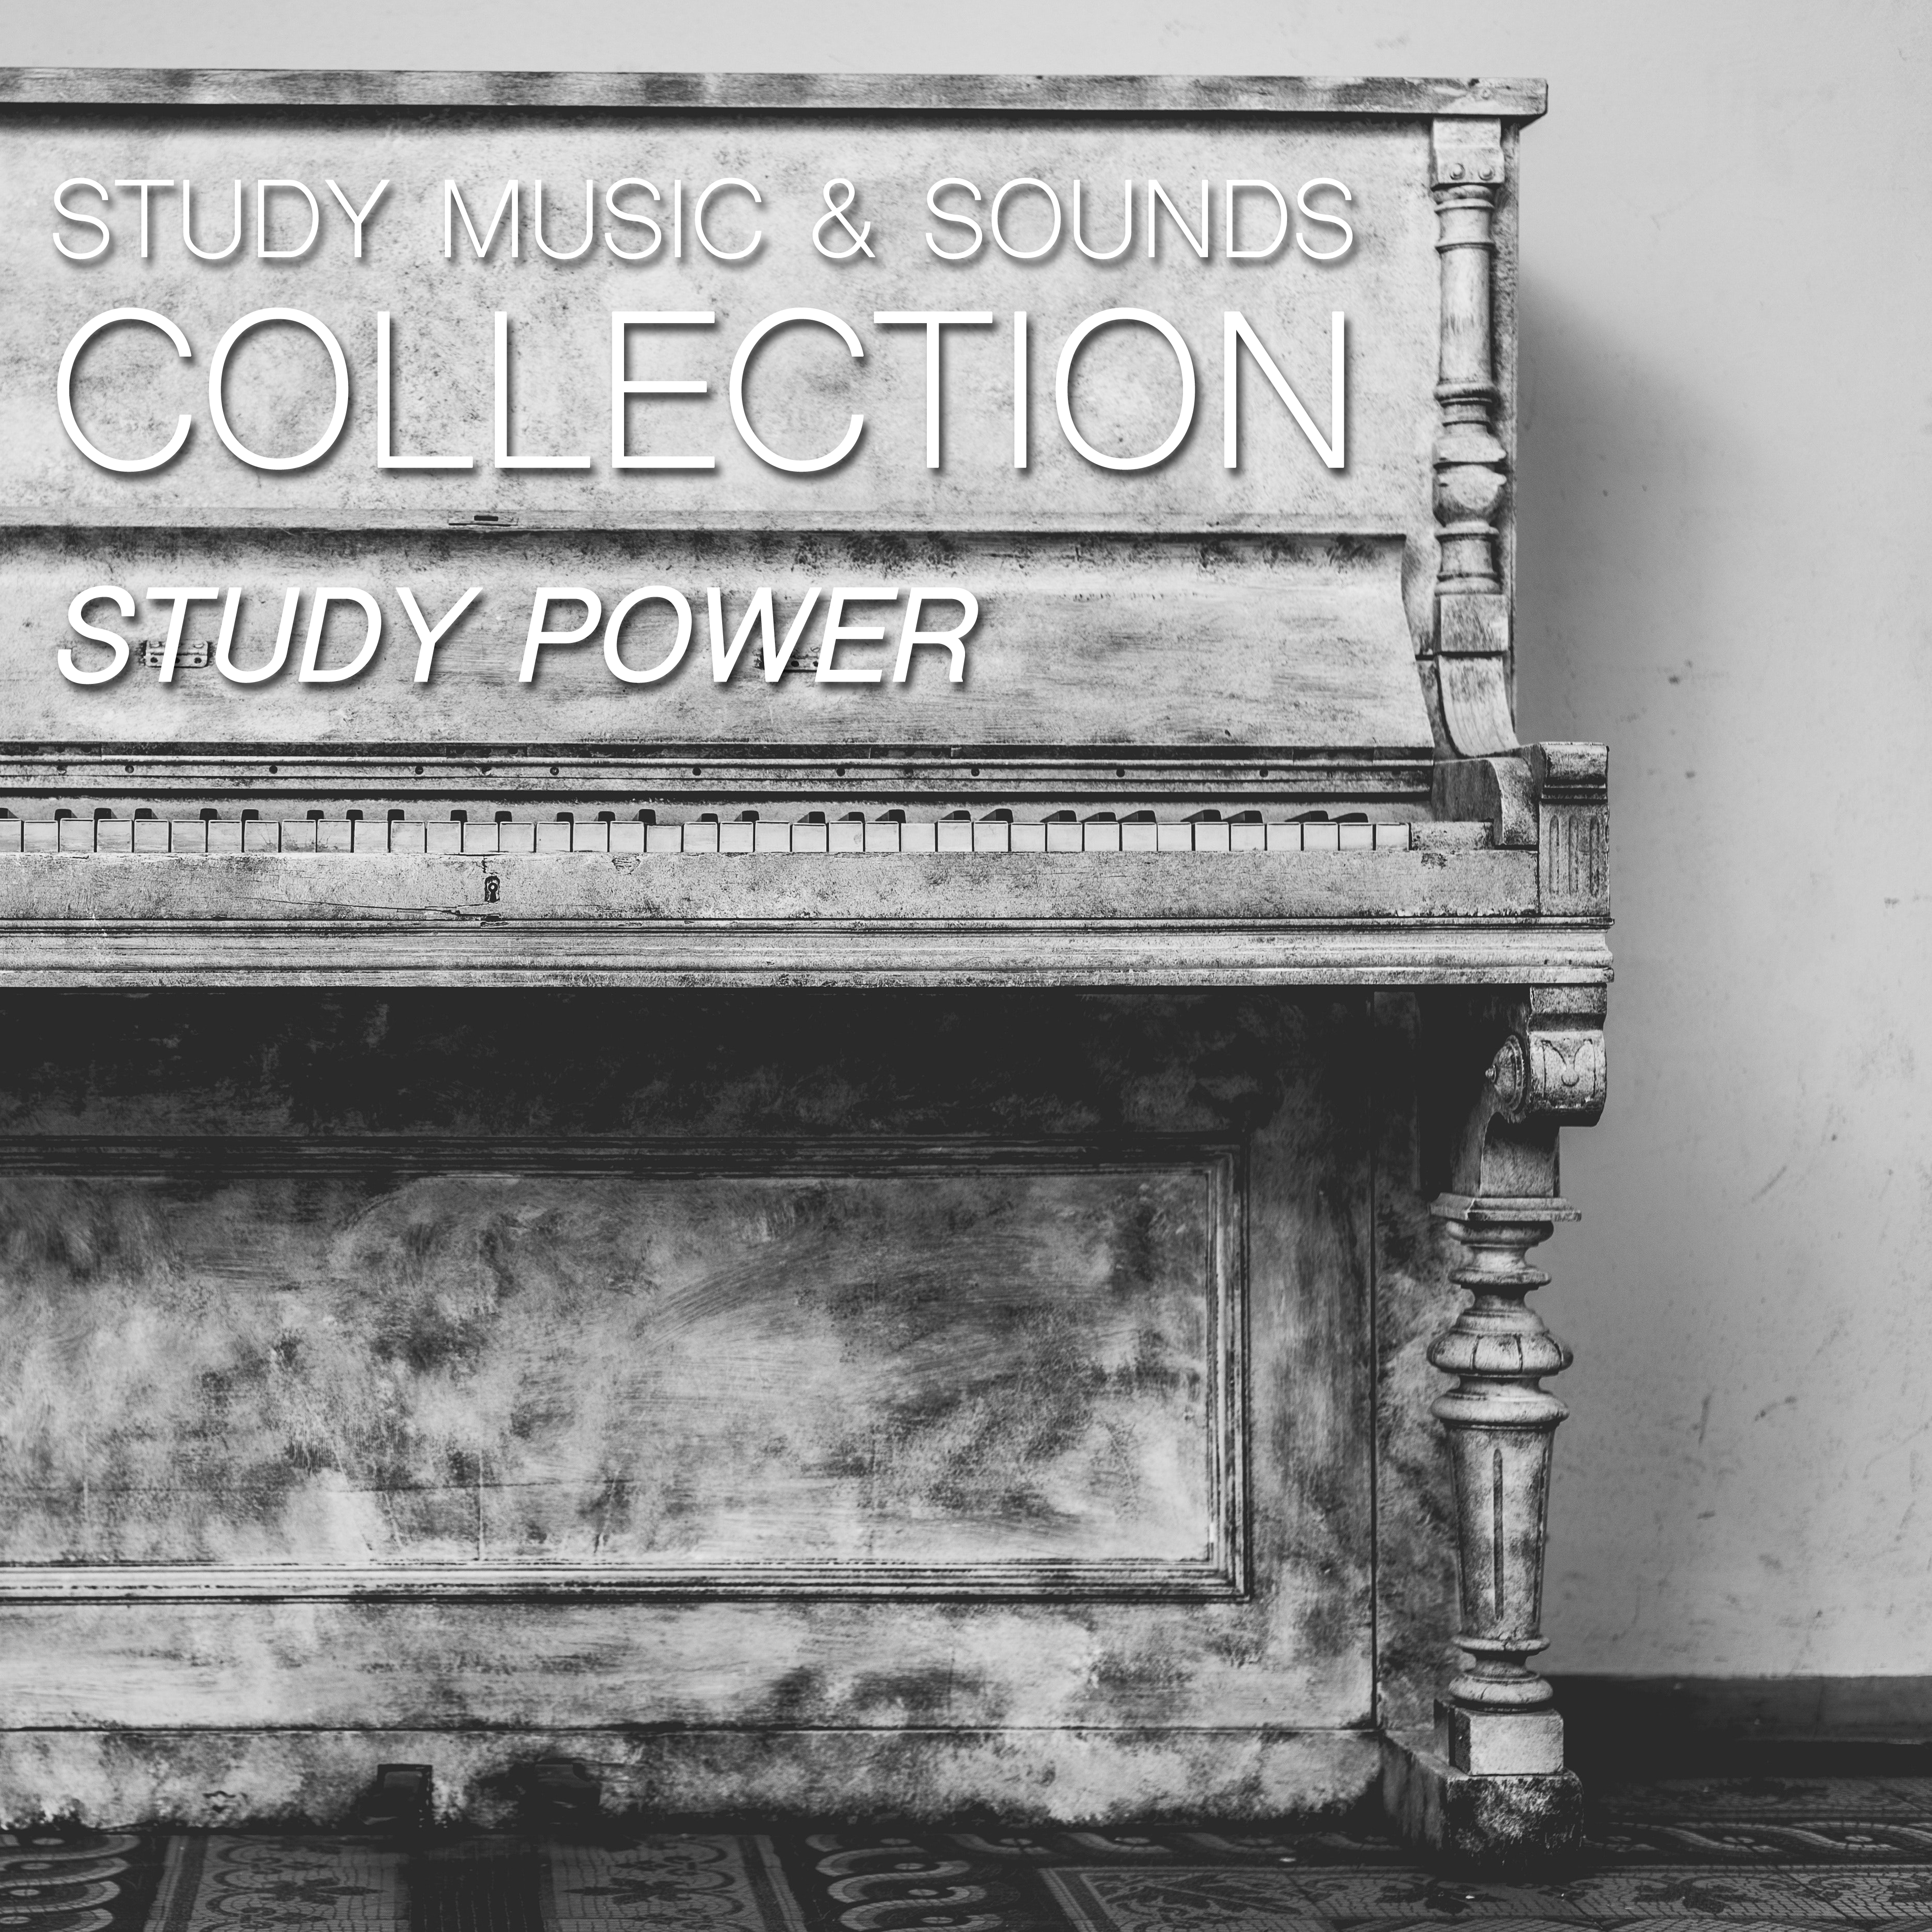 2018 A Study Music & Sounds Collection: Study Power